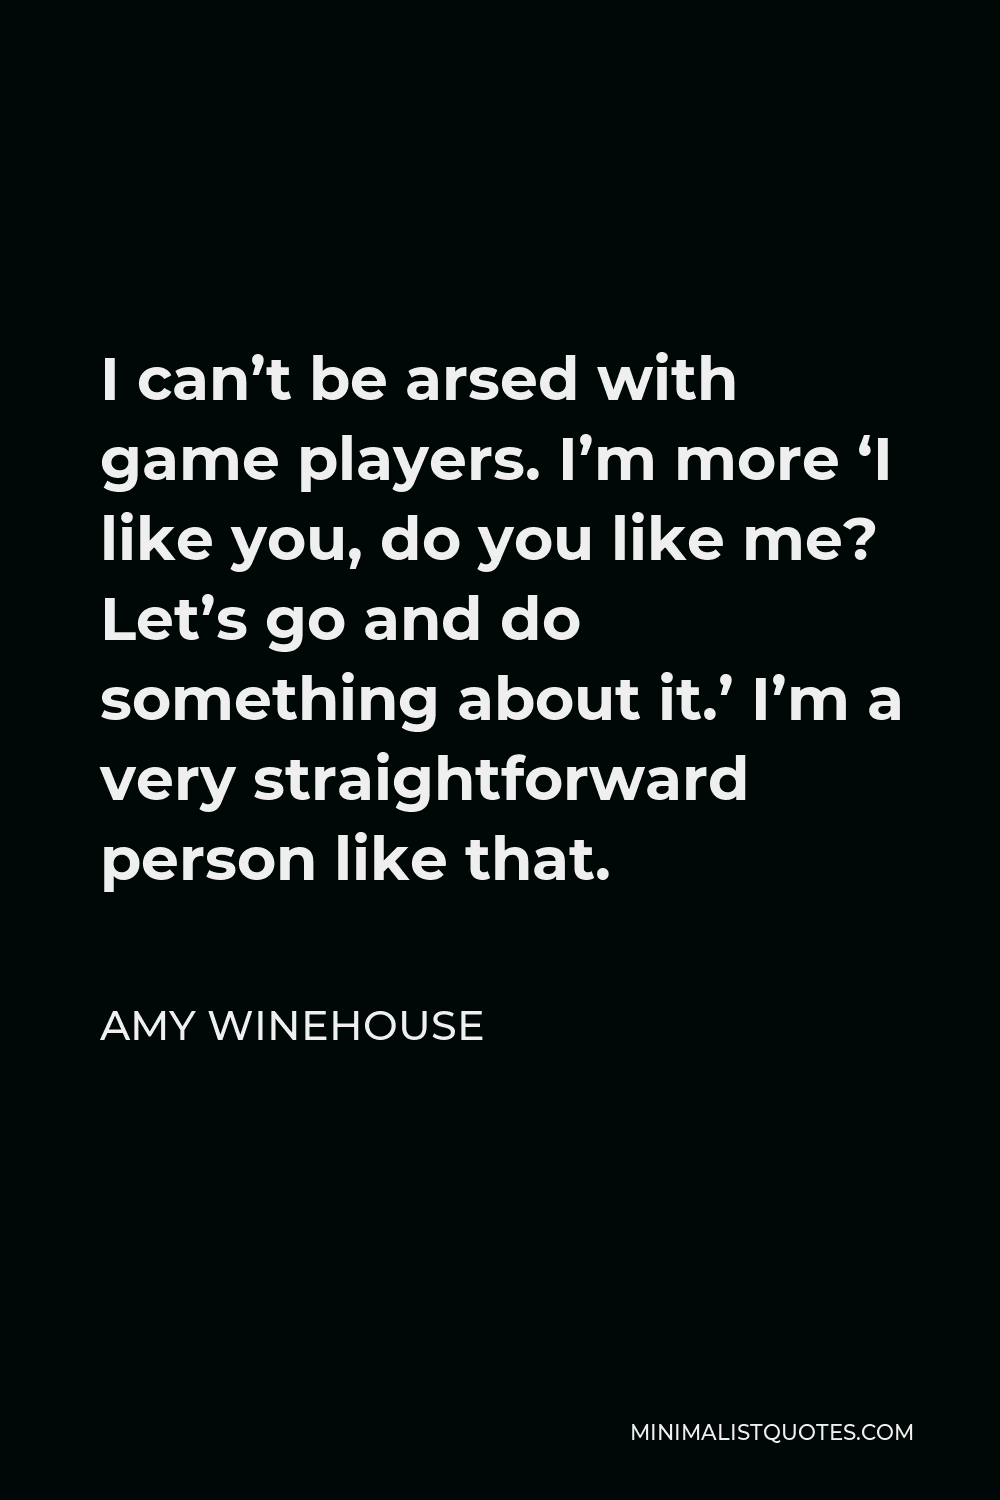 Amy Winehouse Quote - I can’t be arsed with game players. I’m more ‘I like you, do you like me? Let’s go and do something about it.’ I’m a very straightforward person like that.